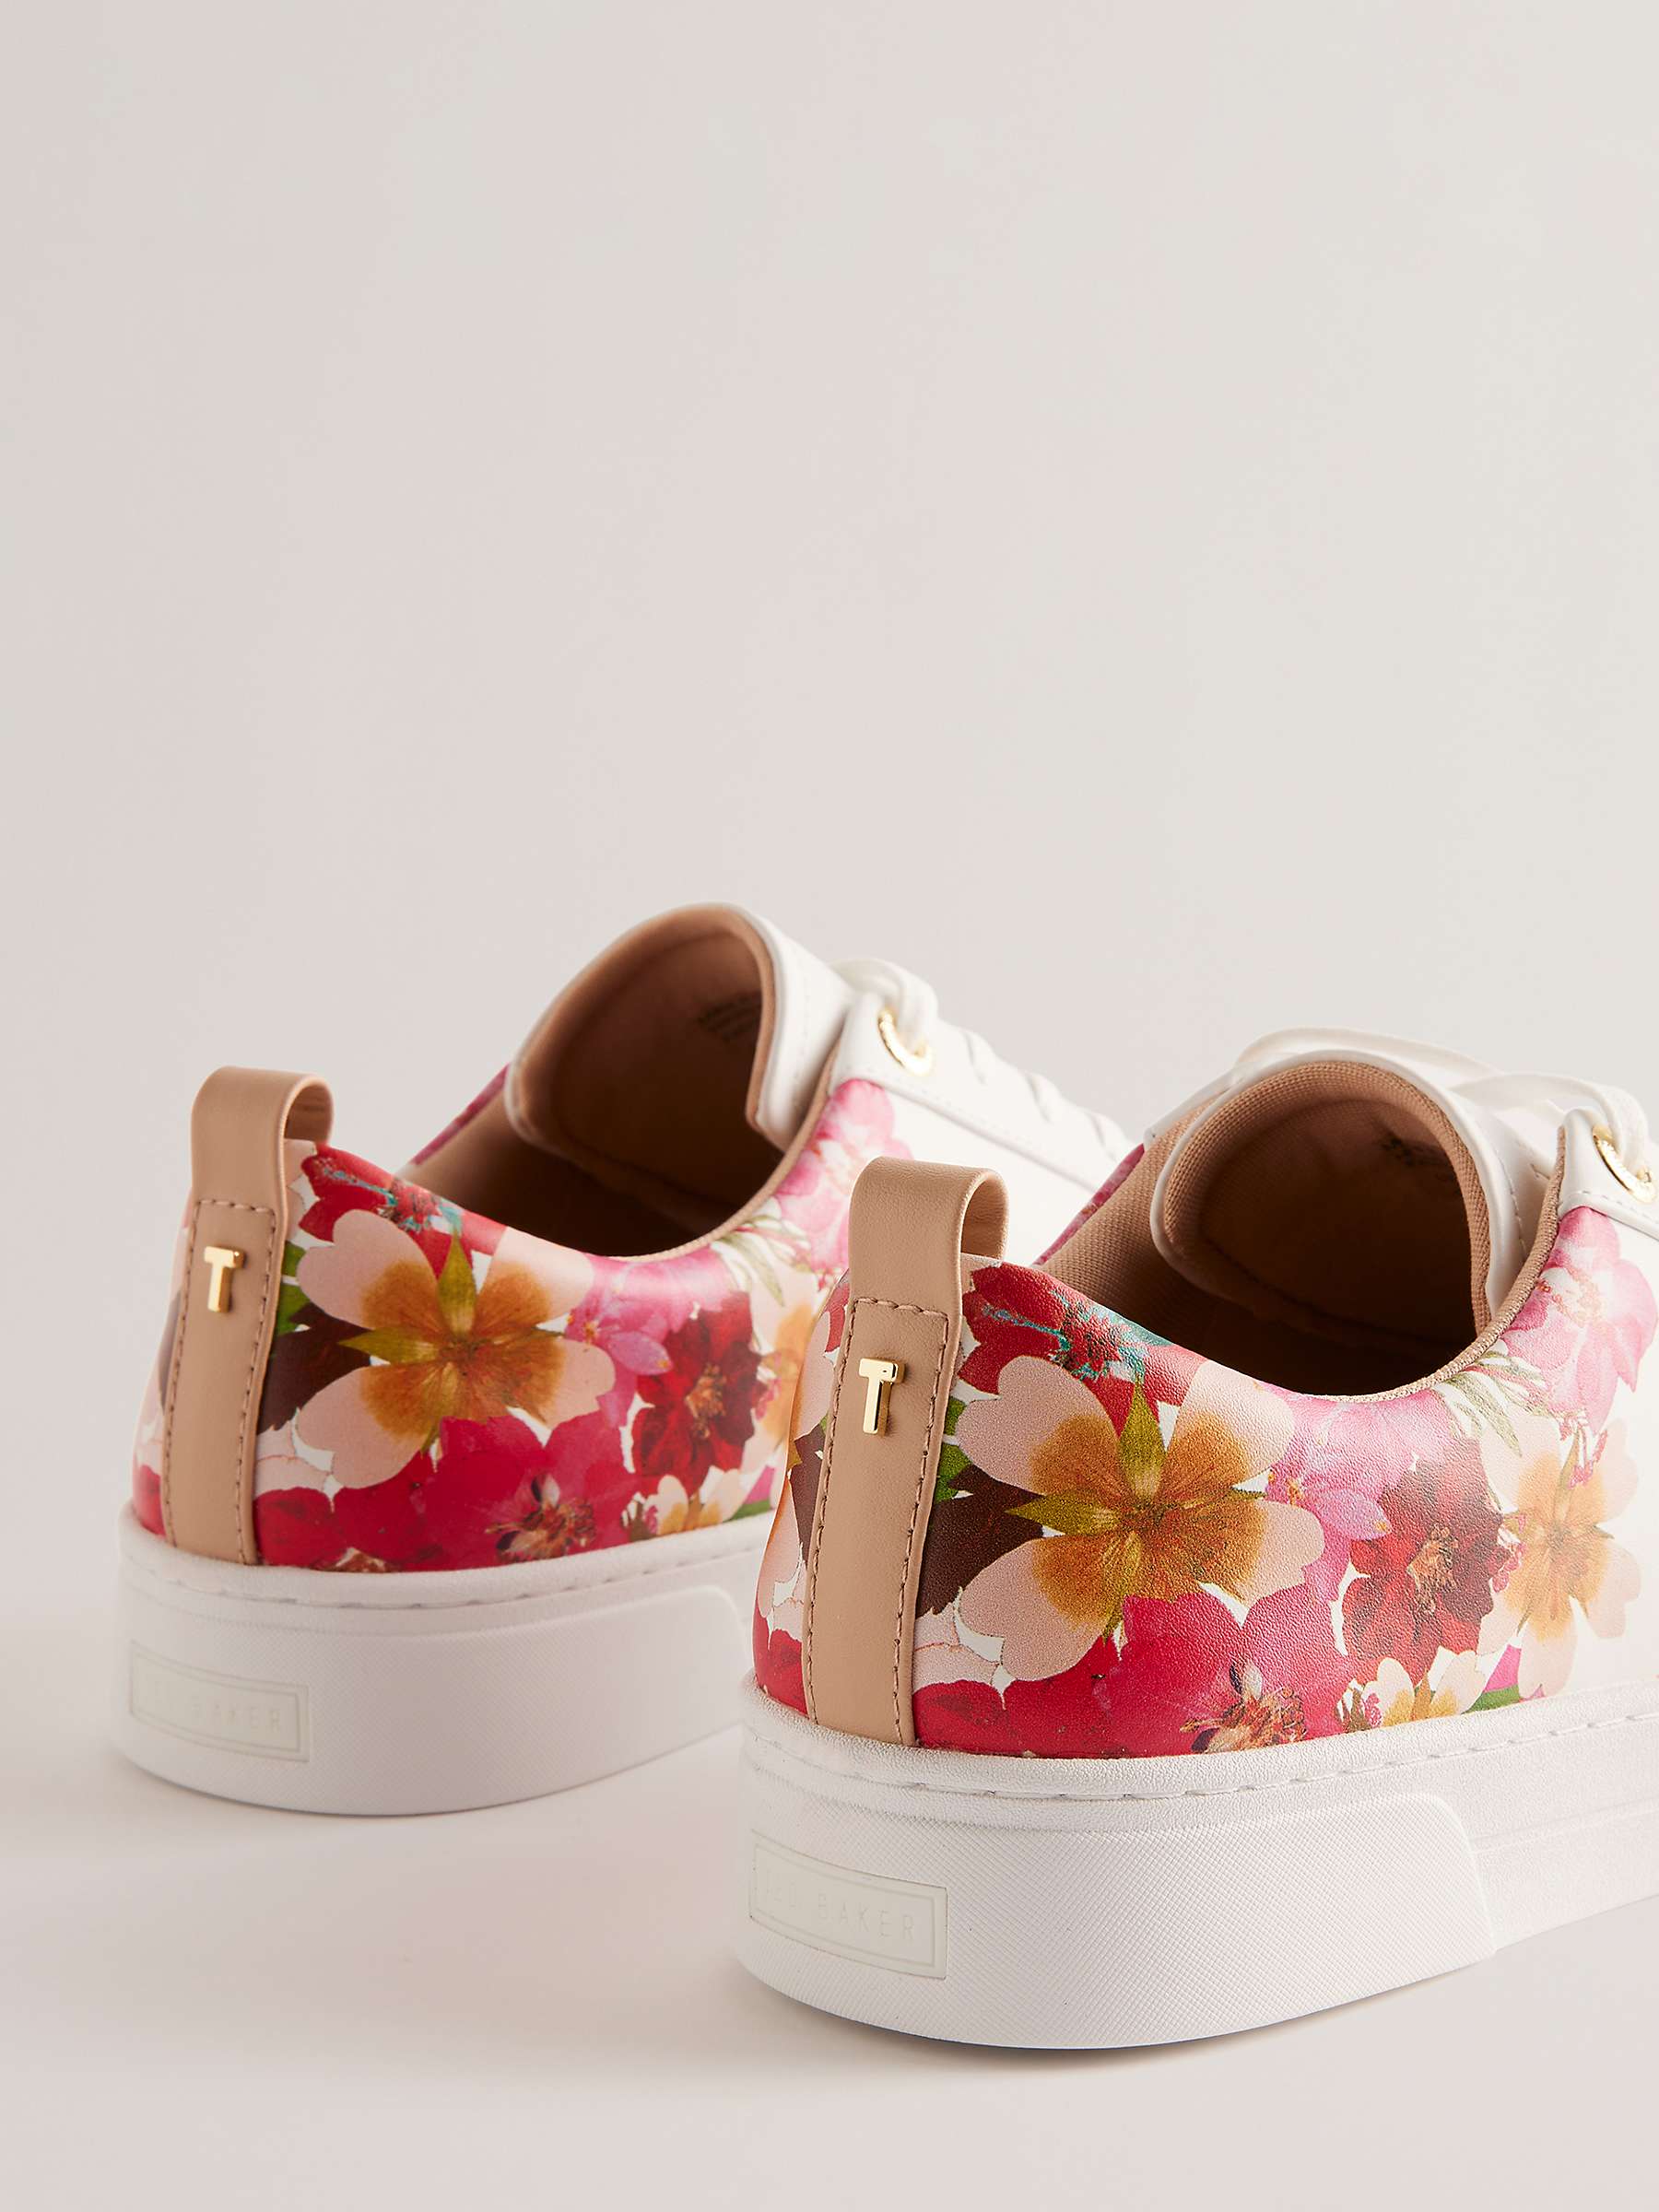 Buy Ted Baker Alissn Floral Leather Cupsole Trainers, White/Multi Online at johnlewis.com